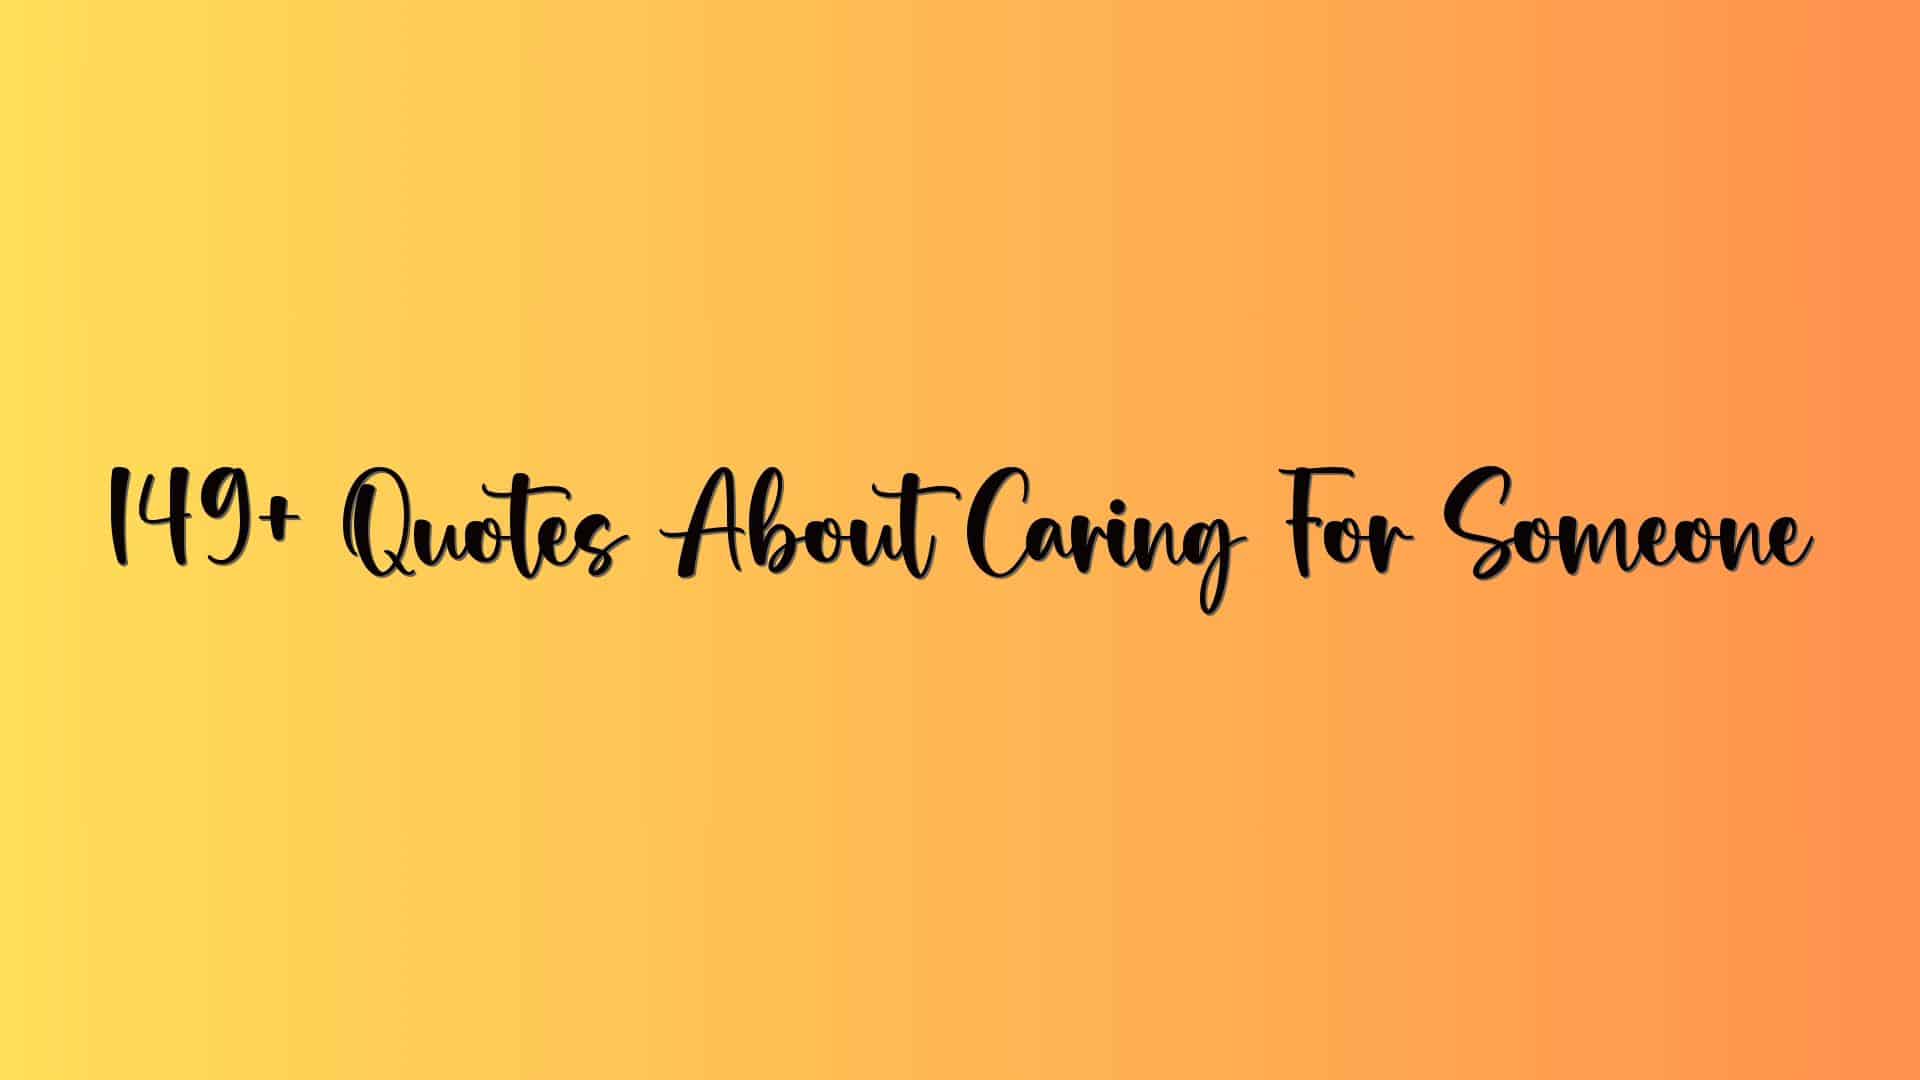 149+ Quotes About Caring For Someone